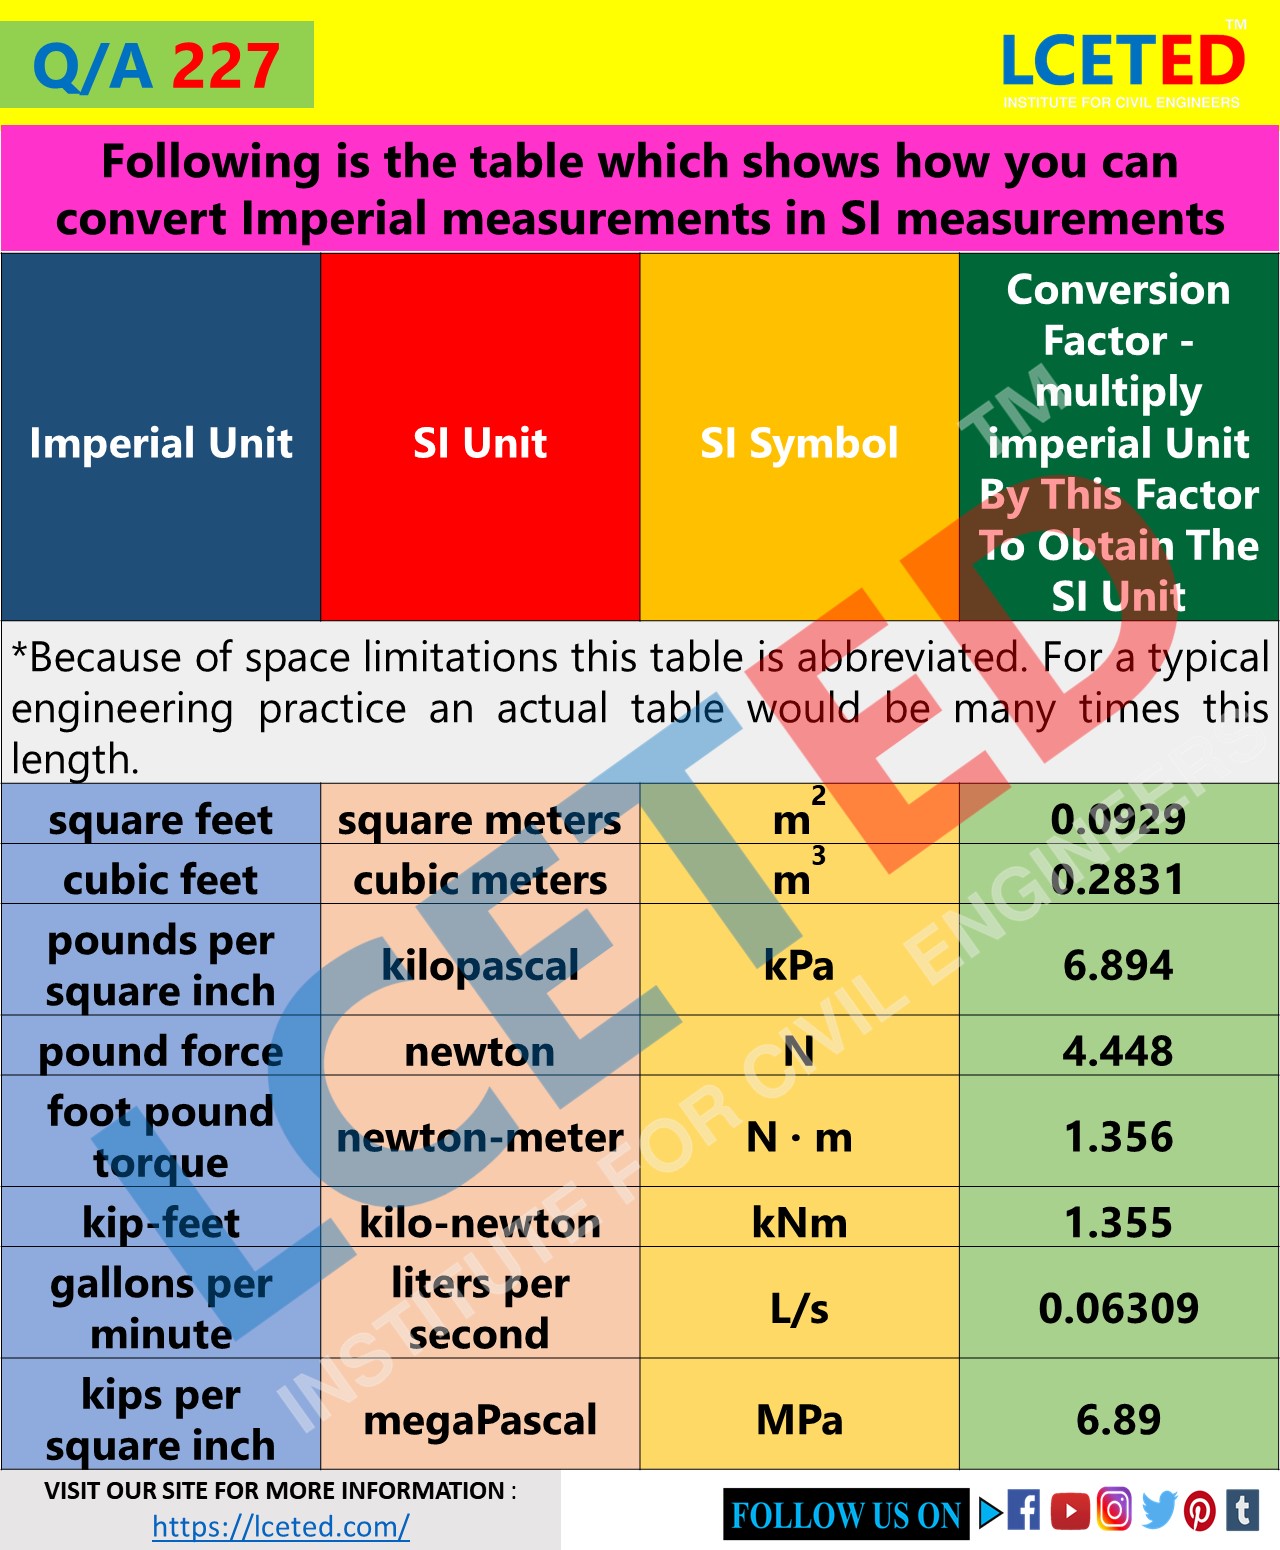 conversion-factors-used-to-convert-imperial-unit-to-si-unit-lceted-lceted-institute-for-civil